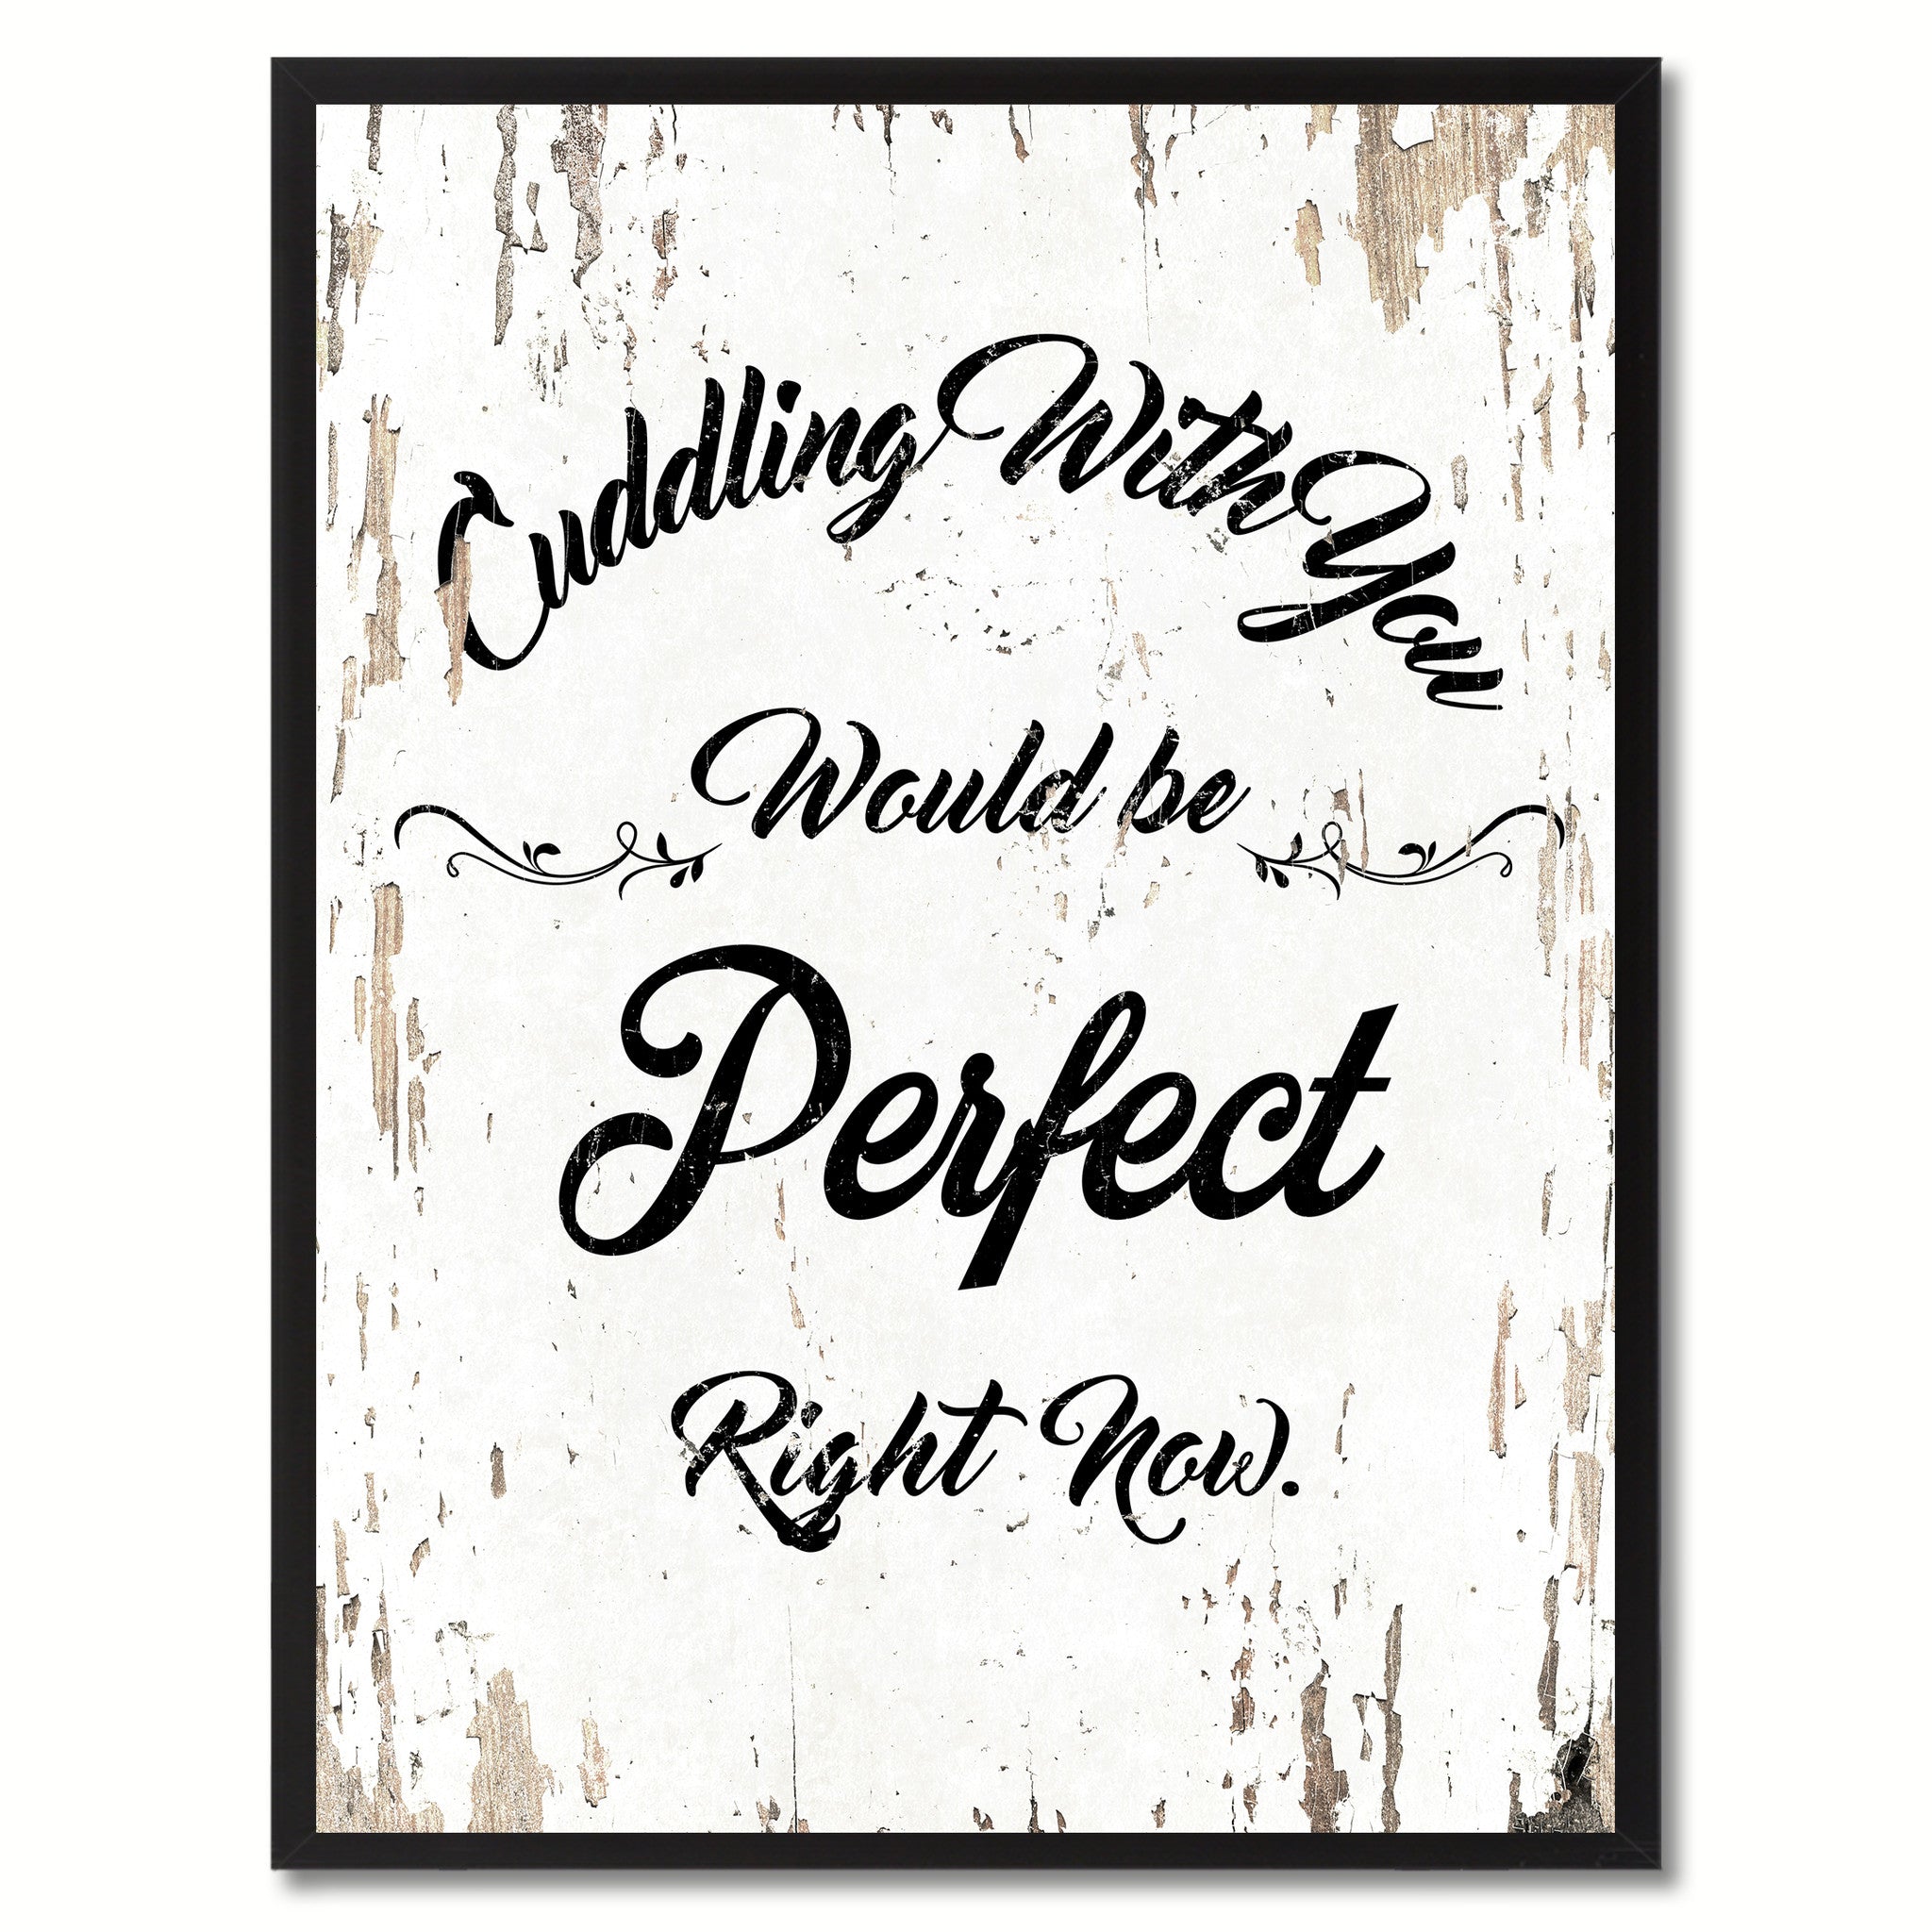 Cuddling with you would be perfect right now Happy Quote Saying Gift Ideas Home Decor Wall Art